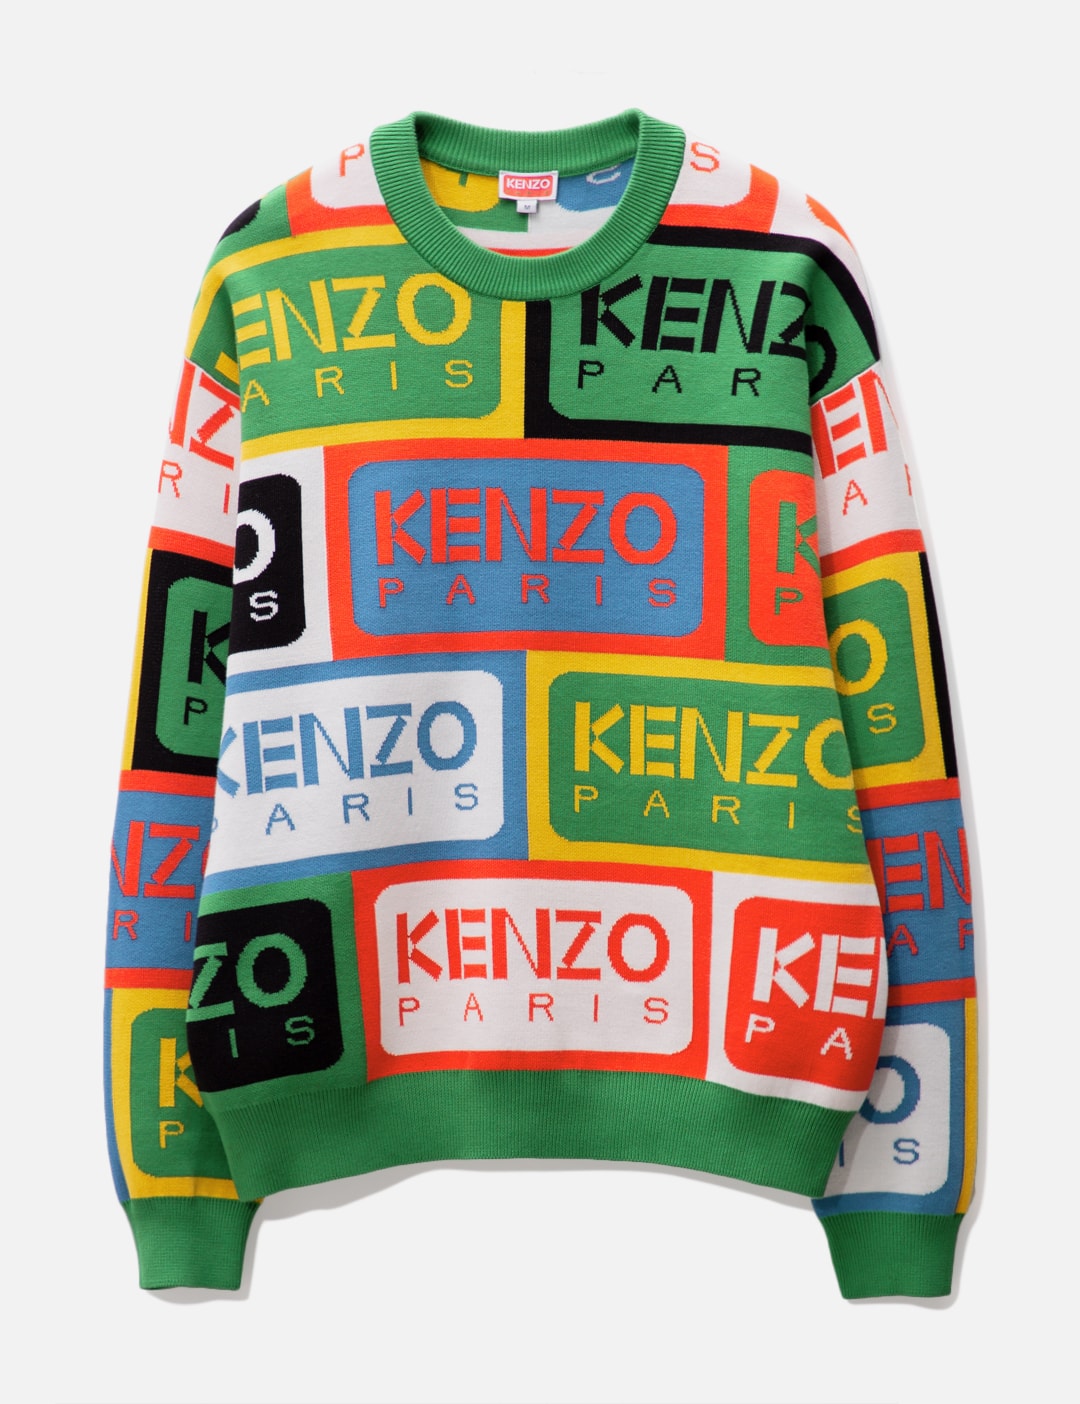 Handelsmerk Kabelbaan ingenieur Kenzo - KENZO PARIS LABEL SWEATER | HBX - Globally Curated Fashion and  Lifestyle by Hypebeast